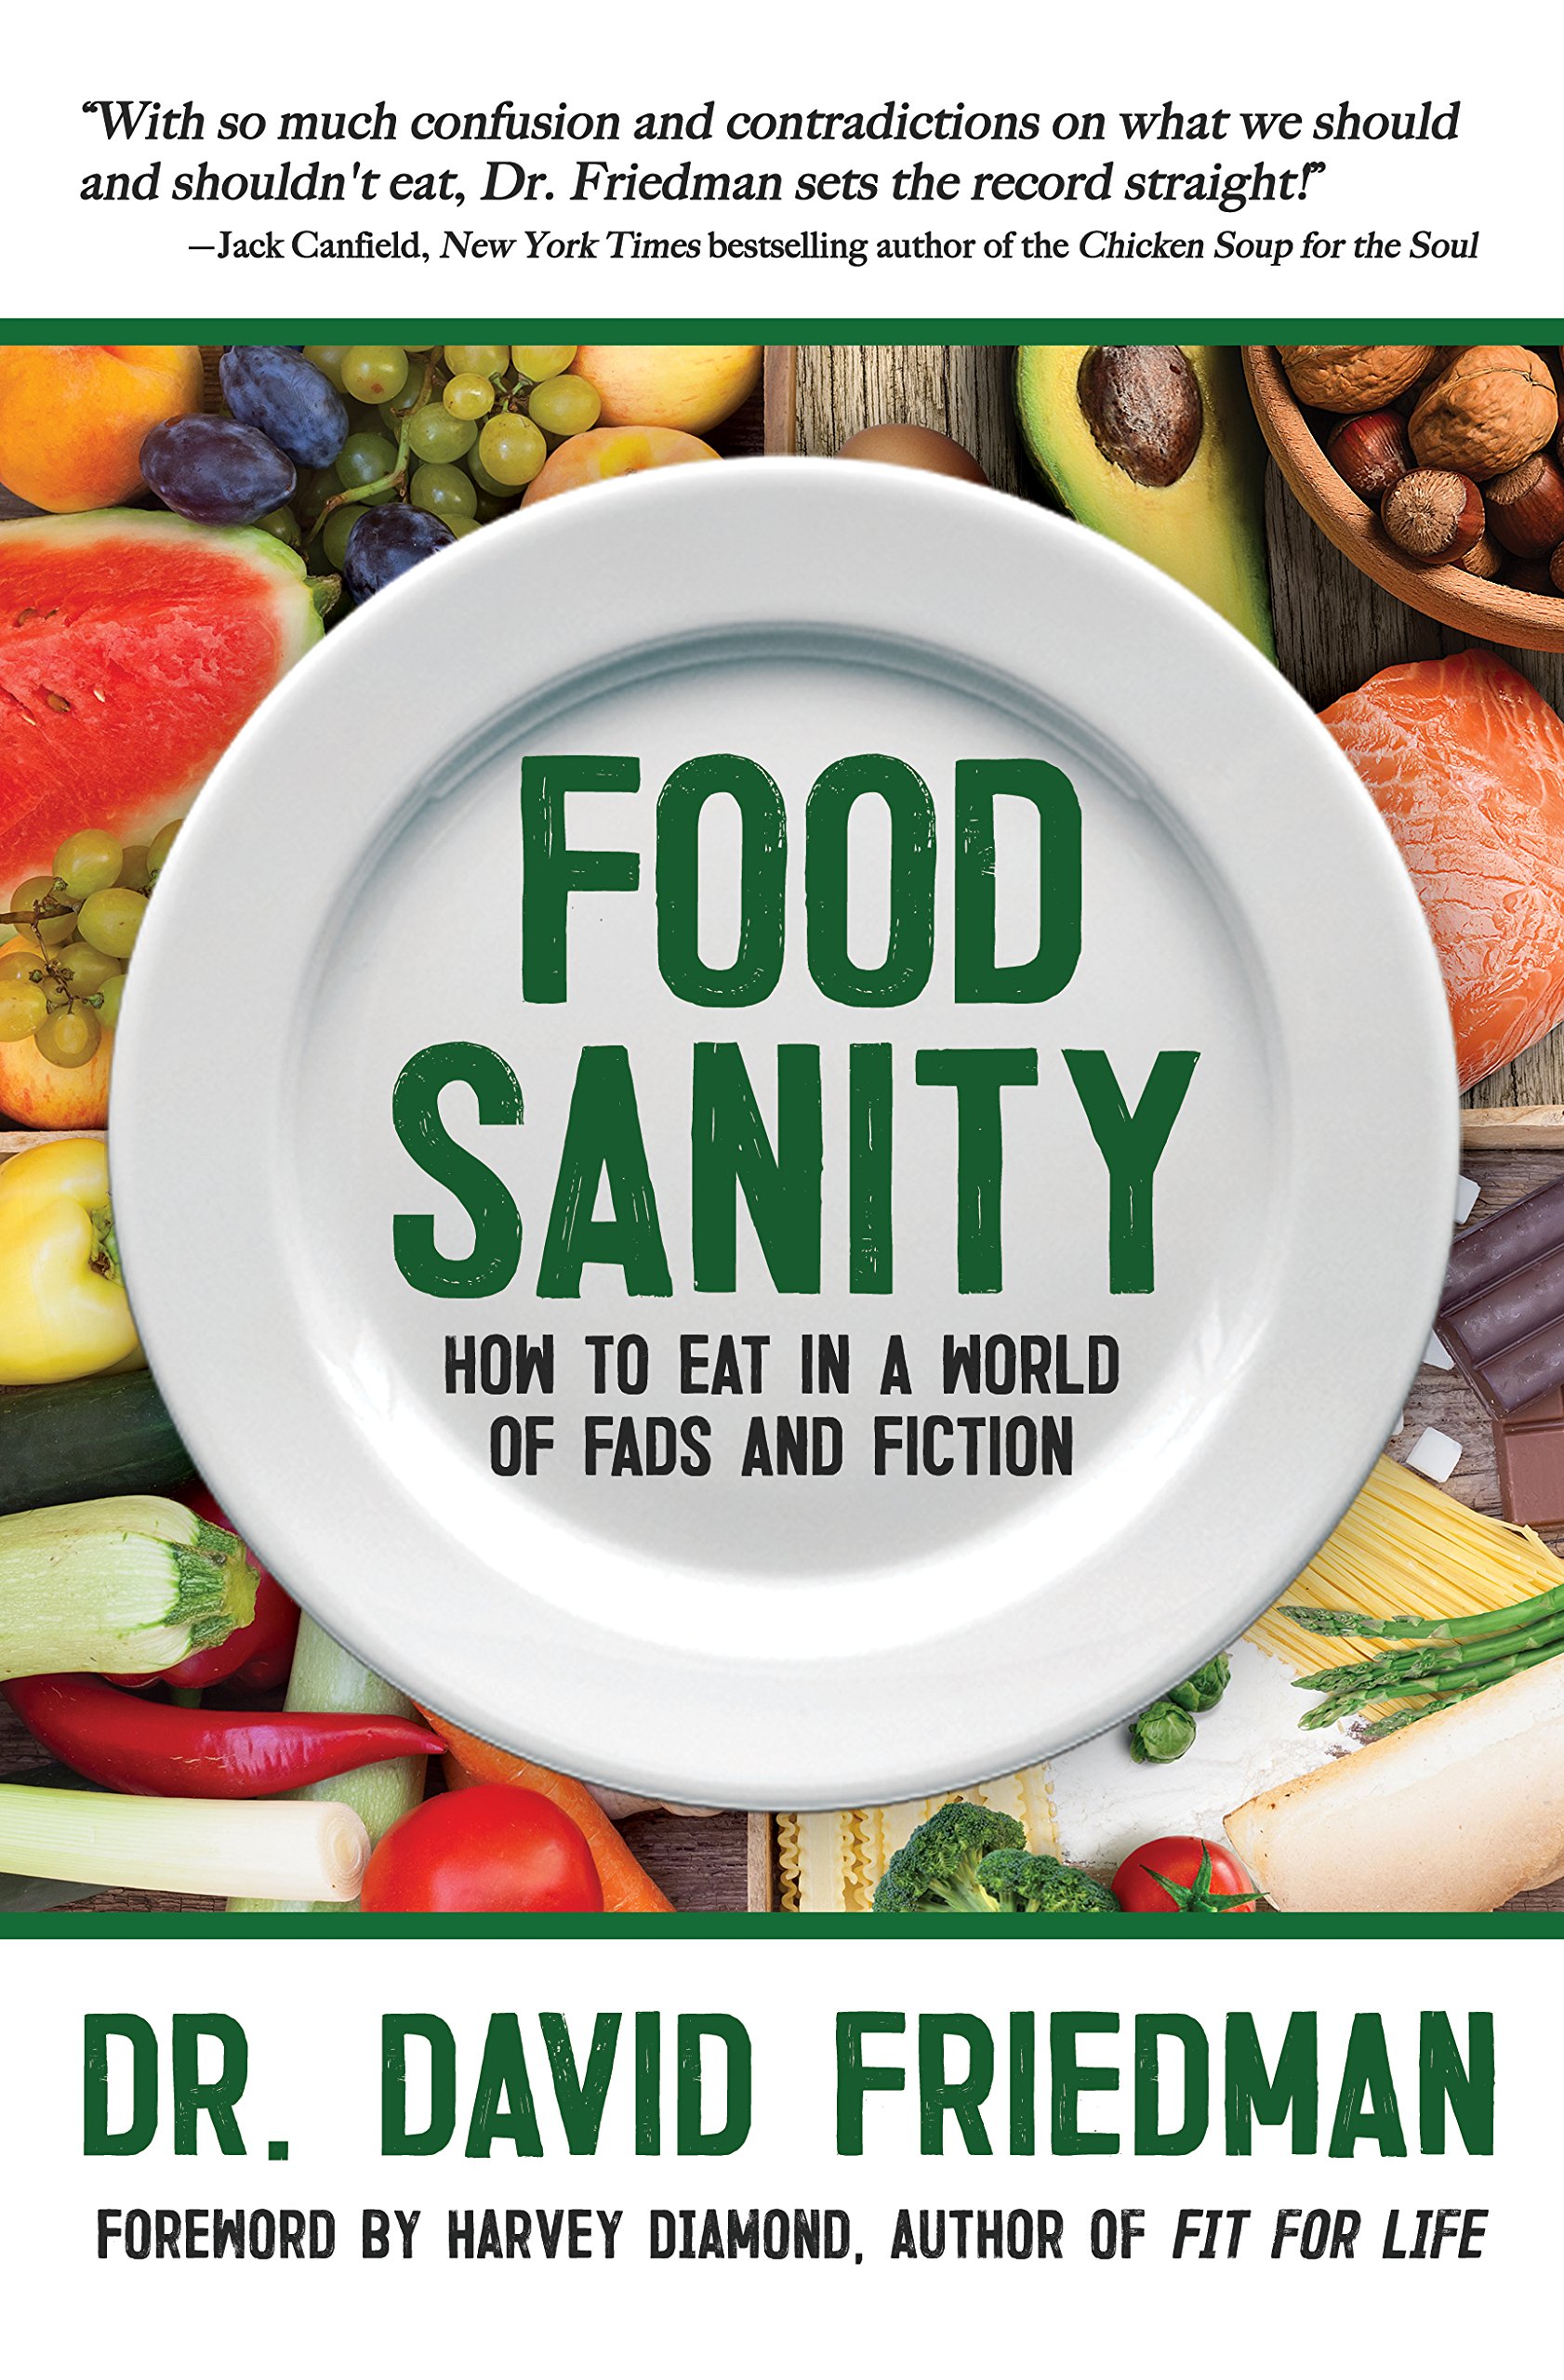 Food Sanity How to Eat in a World of Fads Fiction Turner Publishing by Dr. David Friedman 1